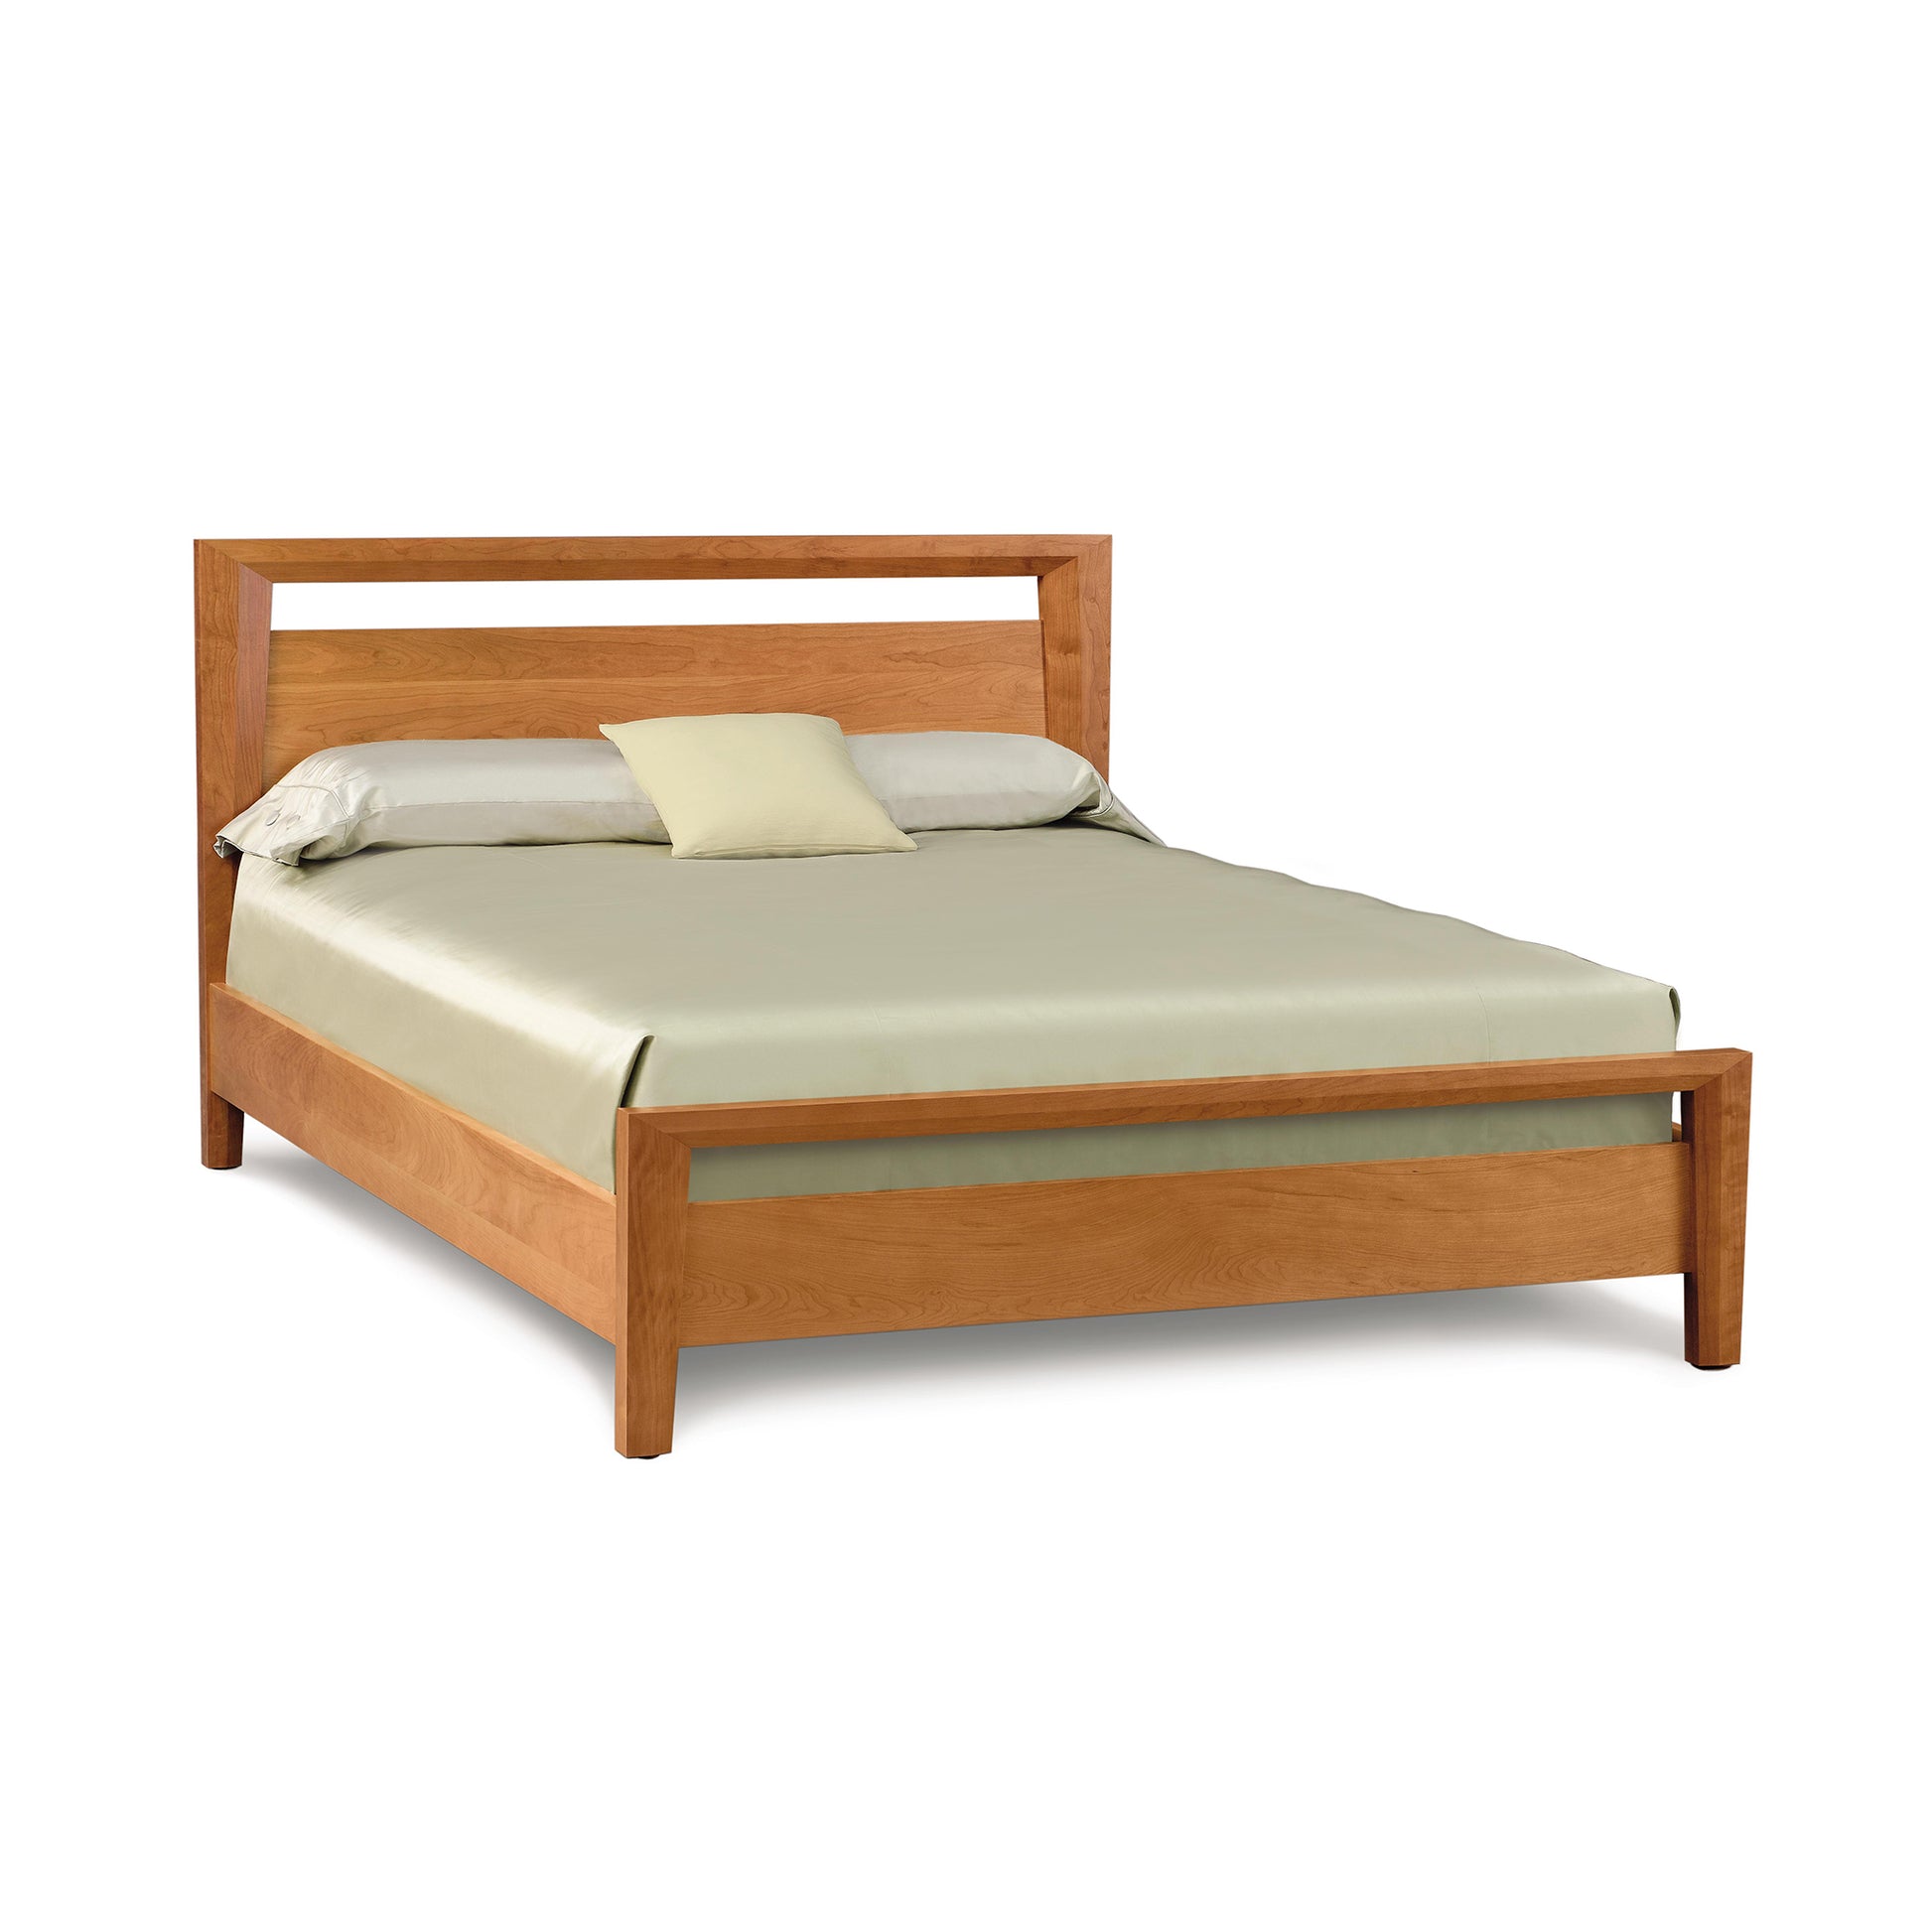 A solid Mansfield Cherry Platform Bed frame in the Arts and Crafts style, with a neatly made bed including a mattress, light-colored sheets, and a pillow against a plain white background. (Brand: Copeland Furniture)